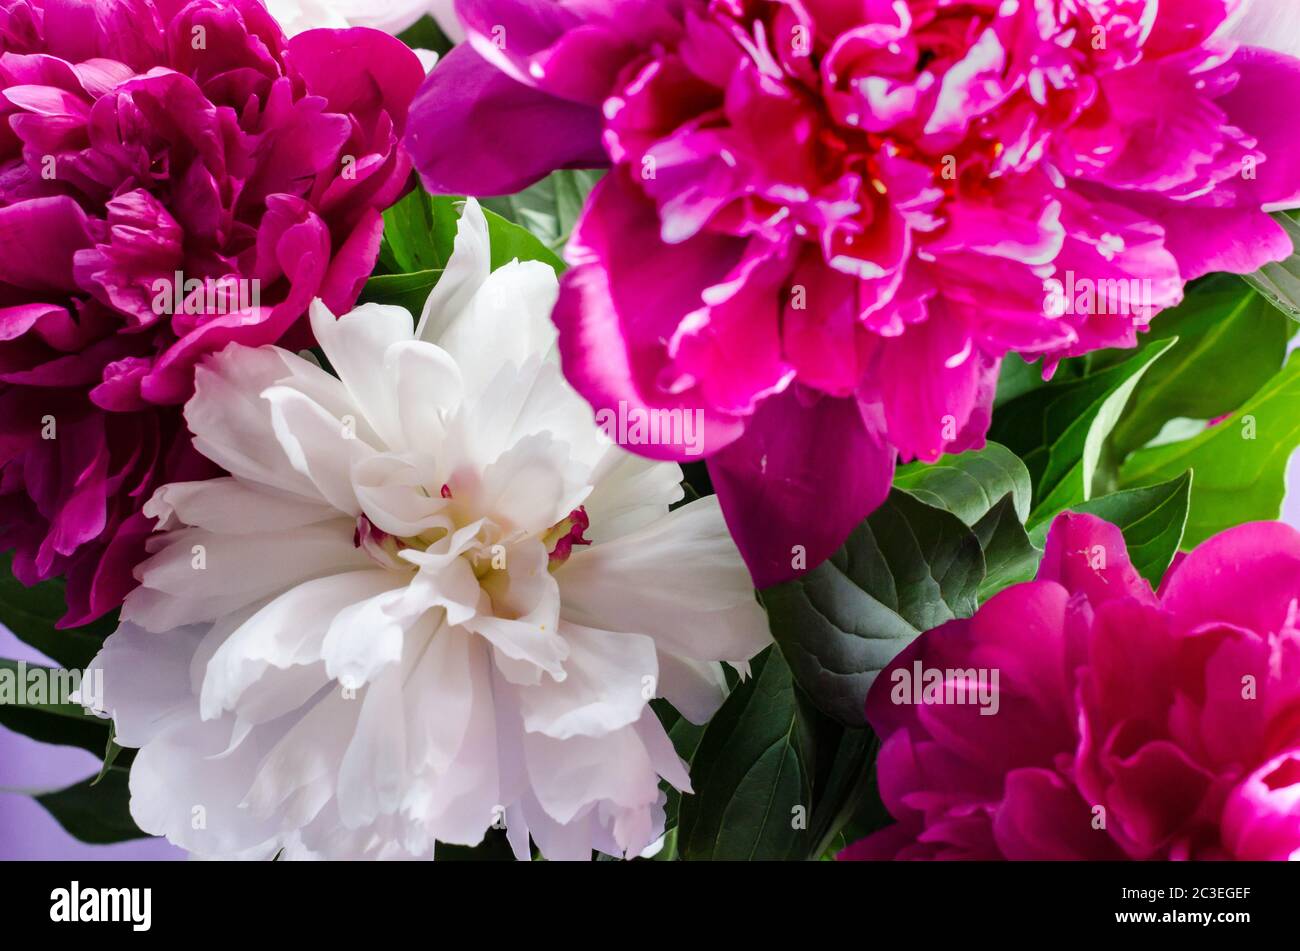 bouquet of pink and white peonies close-up Stock Photo